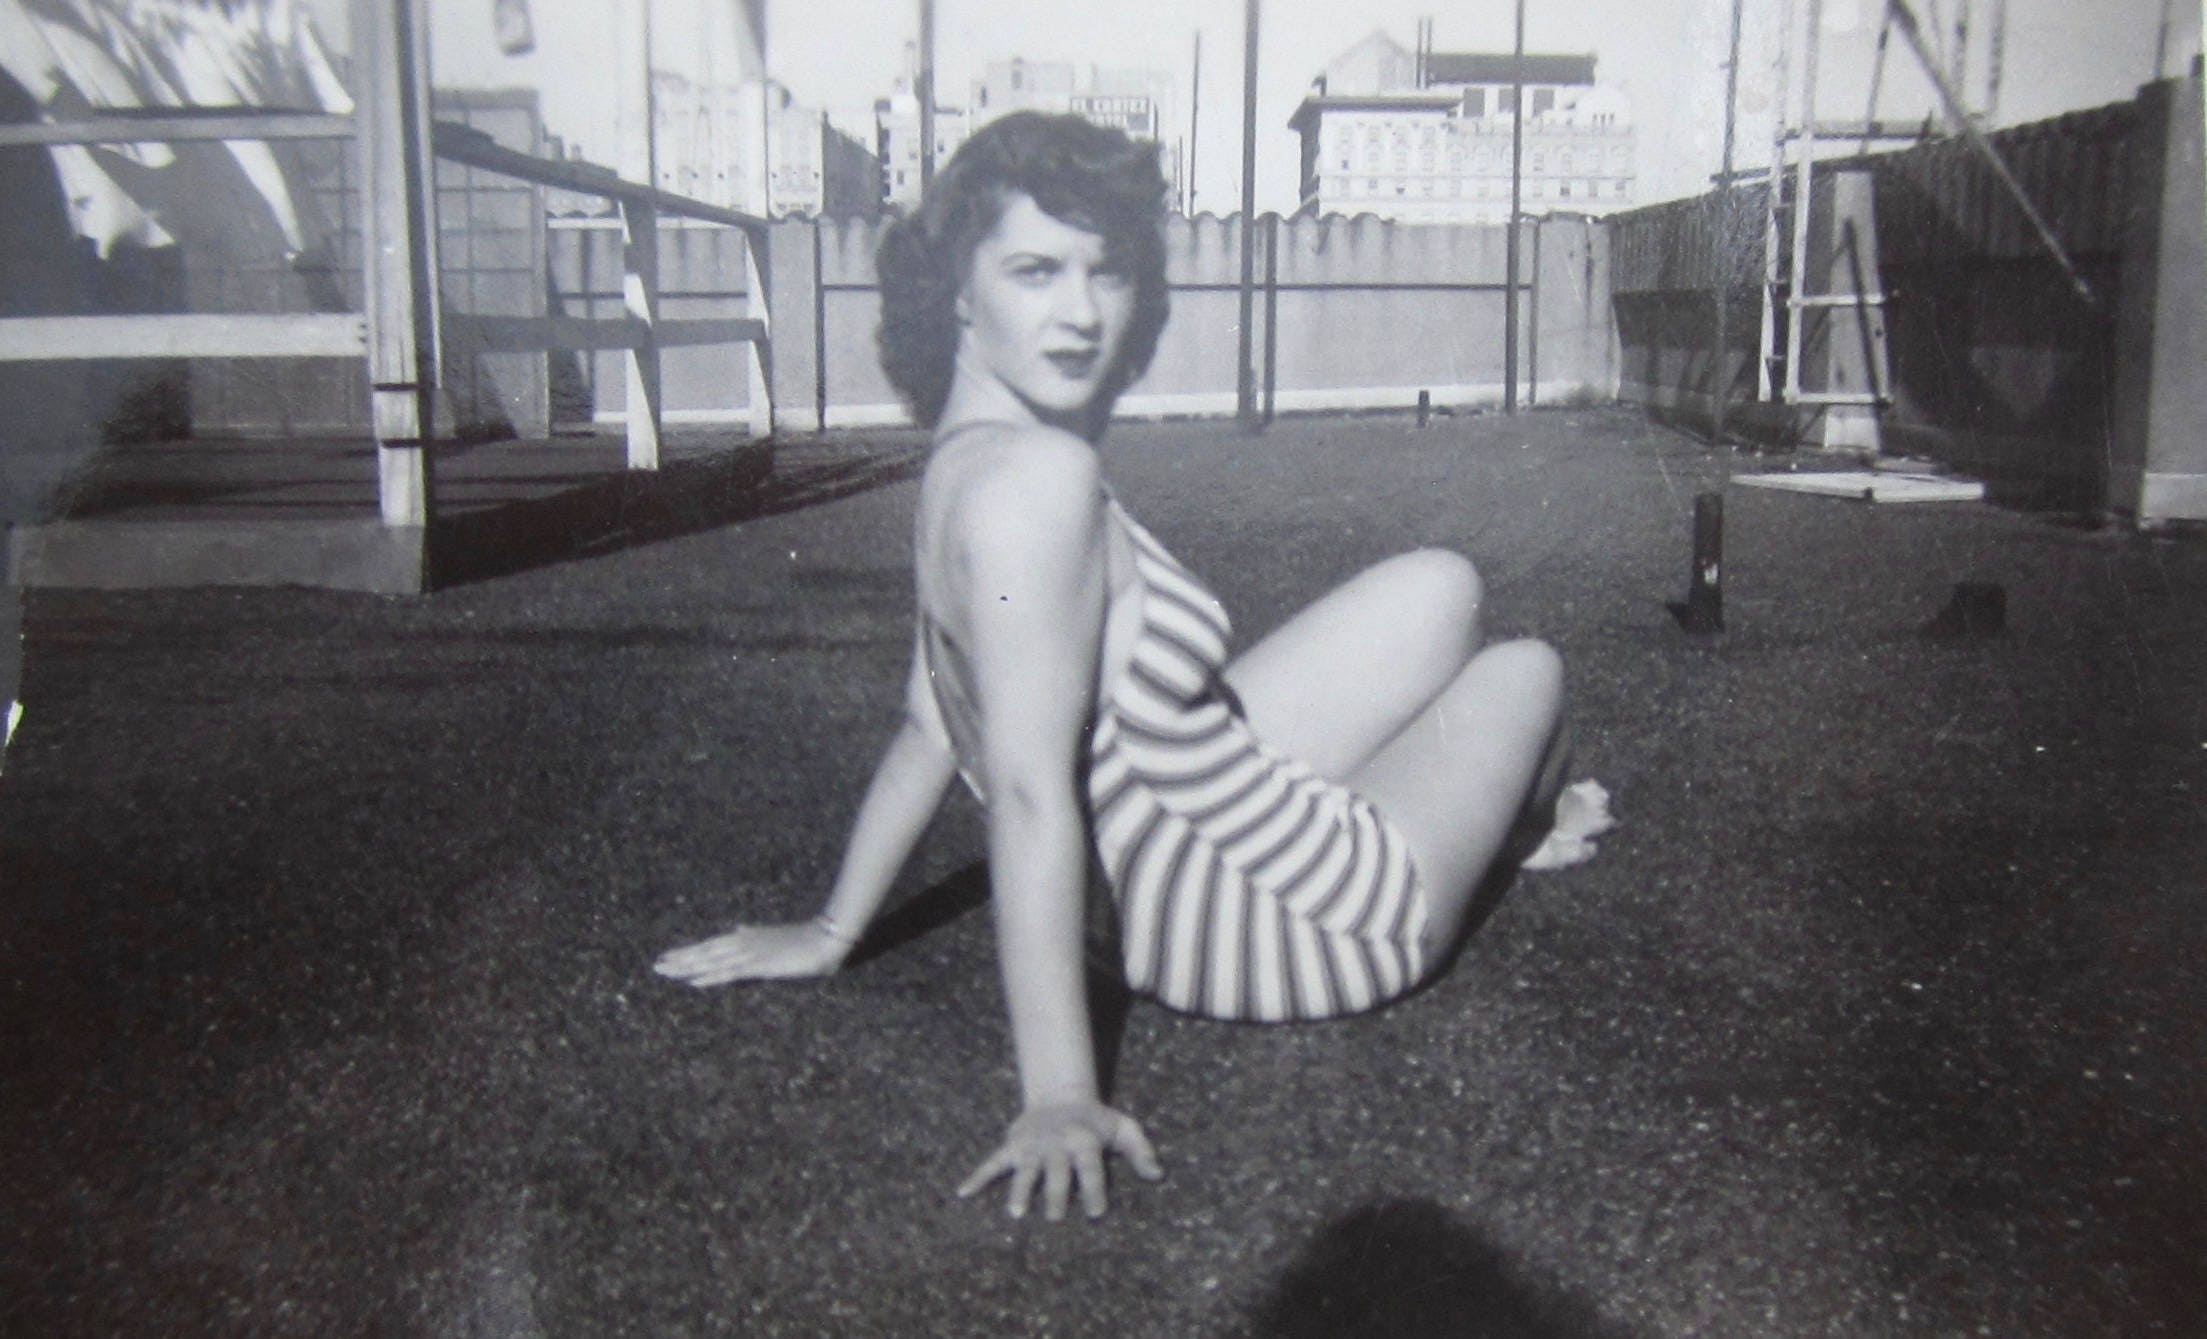 Hubba Hubba Original 1950s Sexy Busty Woman Bathing pic picture image